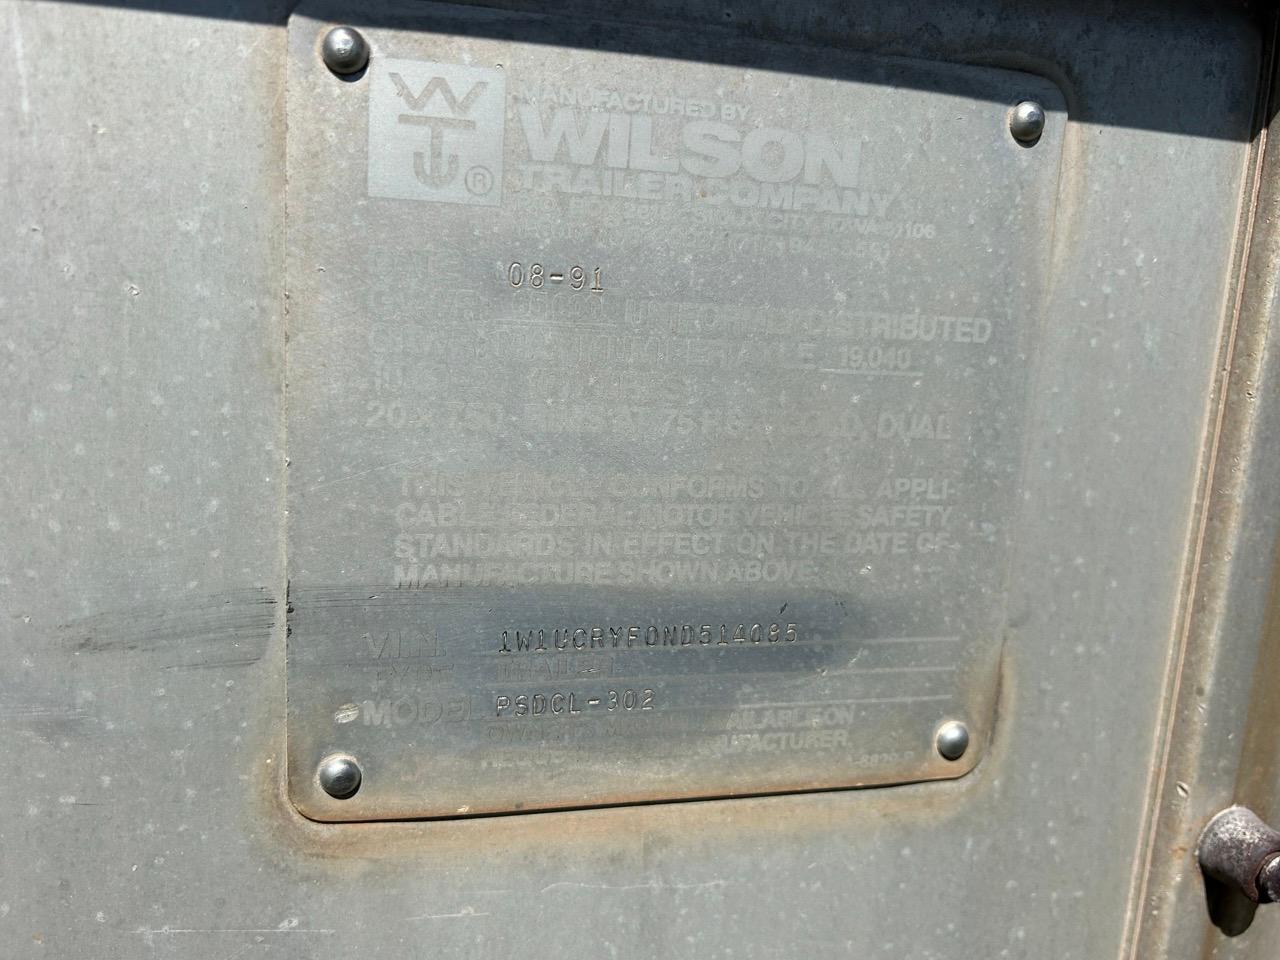 1991 Wilson PSDCL-302